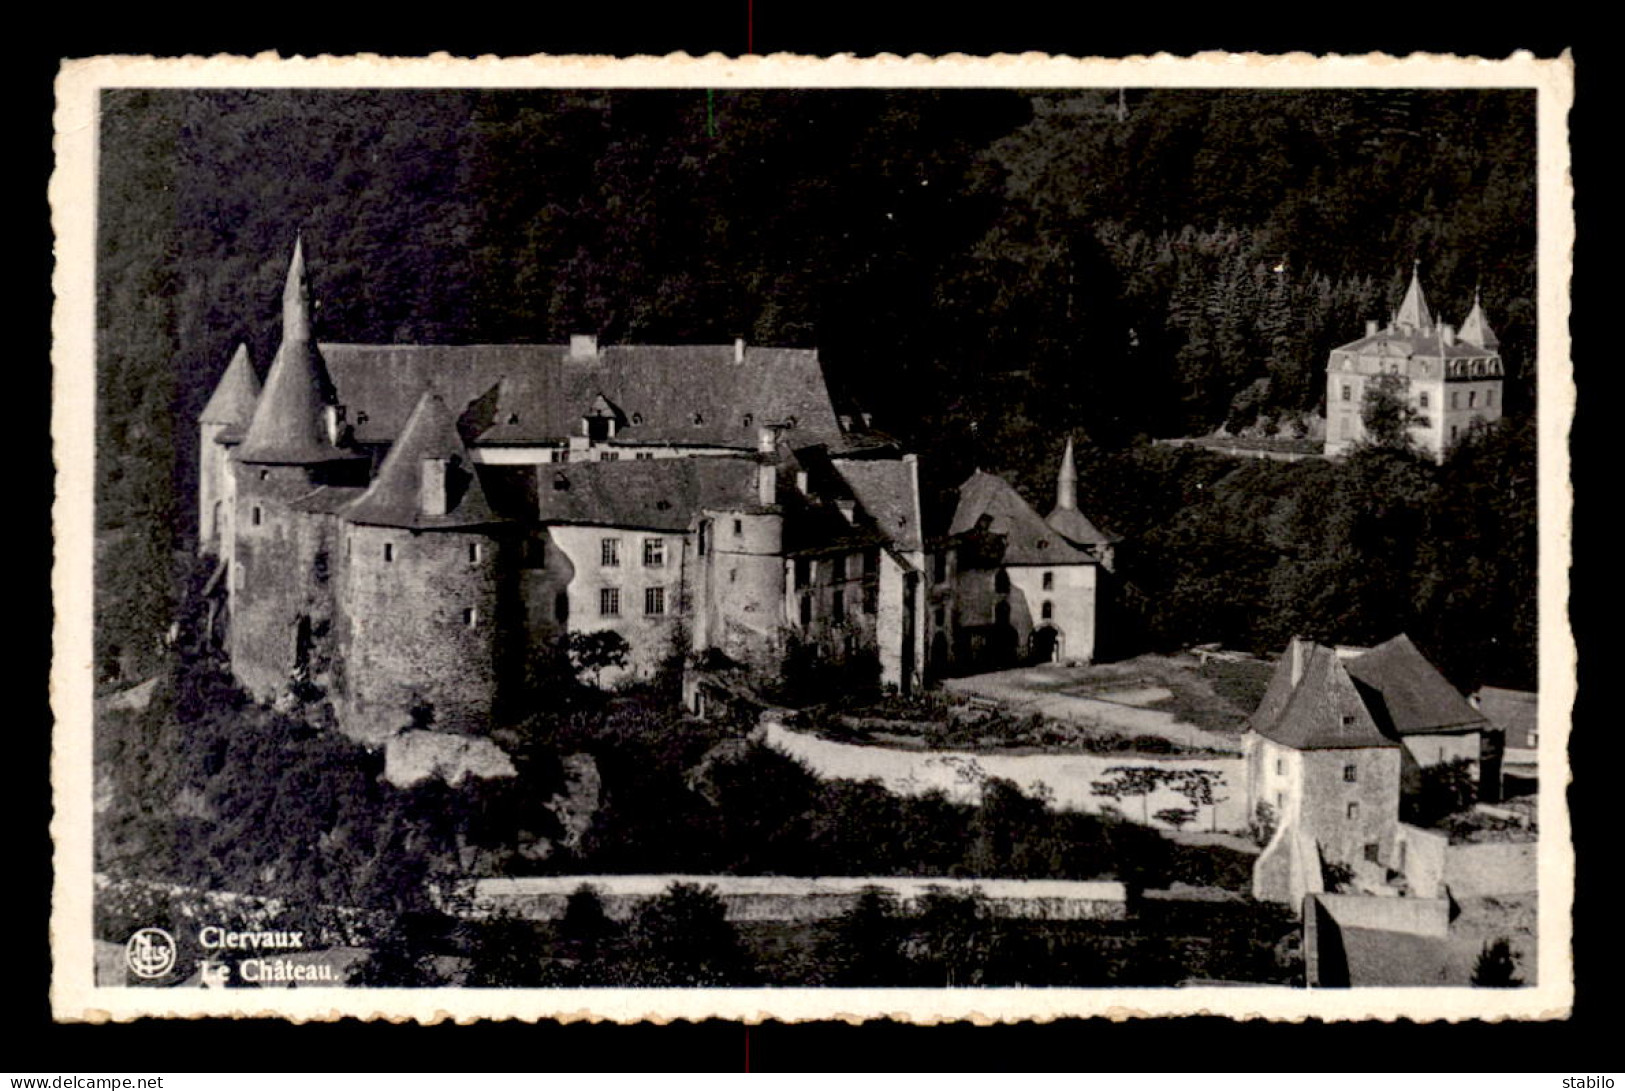 LUXEMBOURG - CLERVAUX - LE CHATEAU - Clervaux